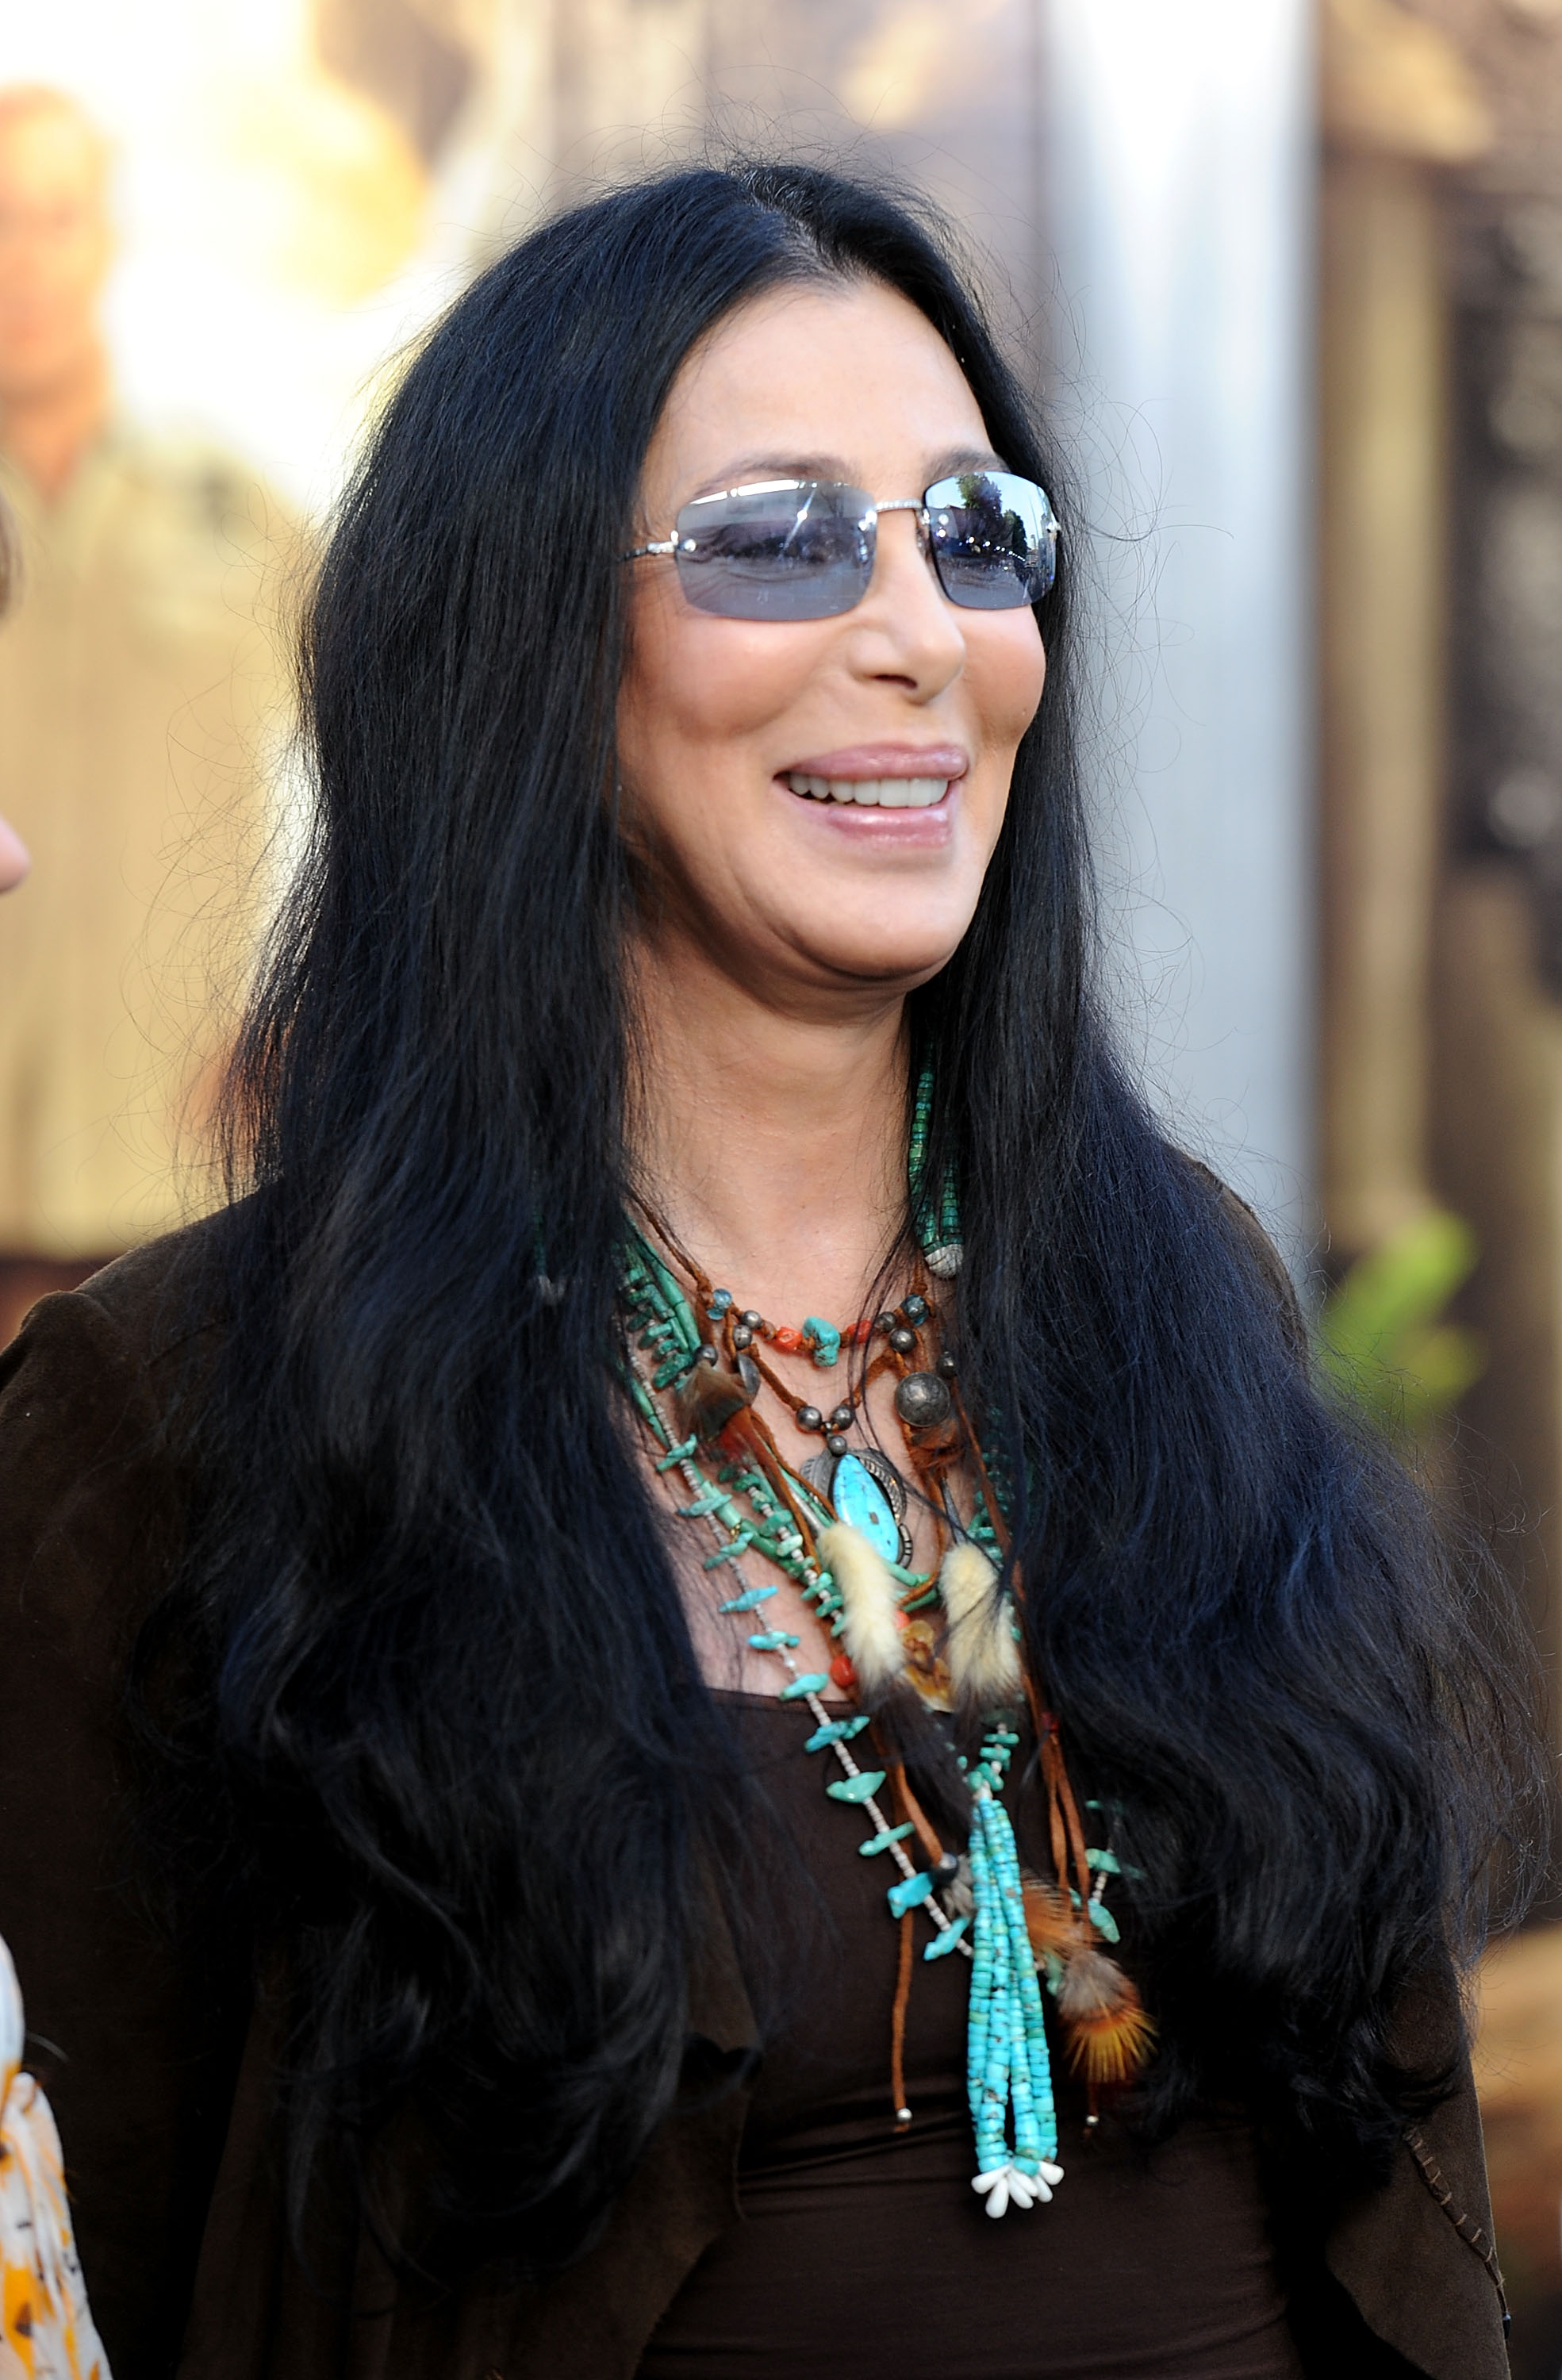 Cher arrives at the "The Zookeeper" premiere at the Regency Village Theater, Westwood on July 6, 2011, in Los Angeles, California. | Source: Getty Images